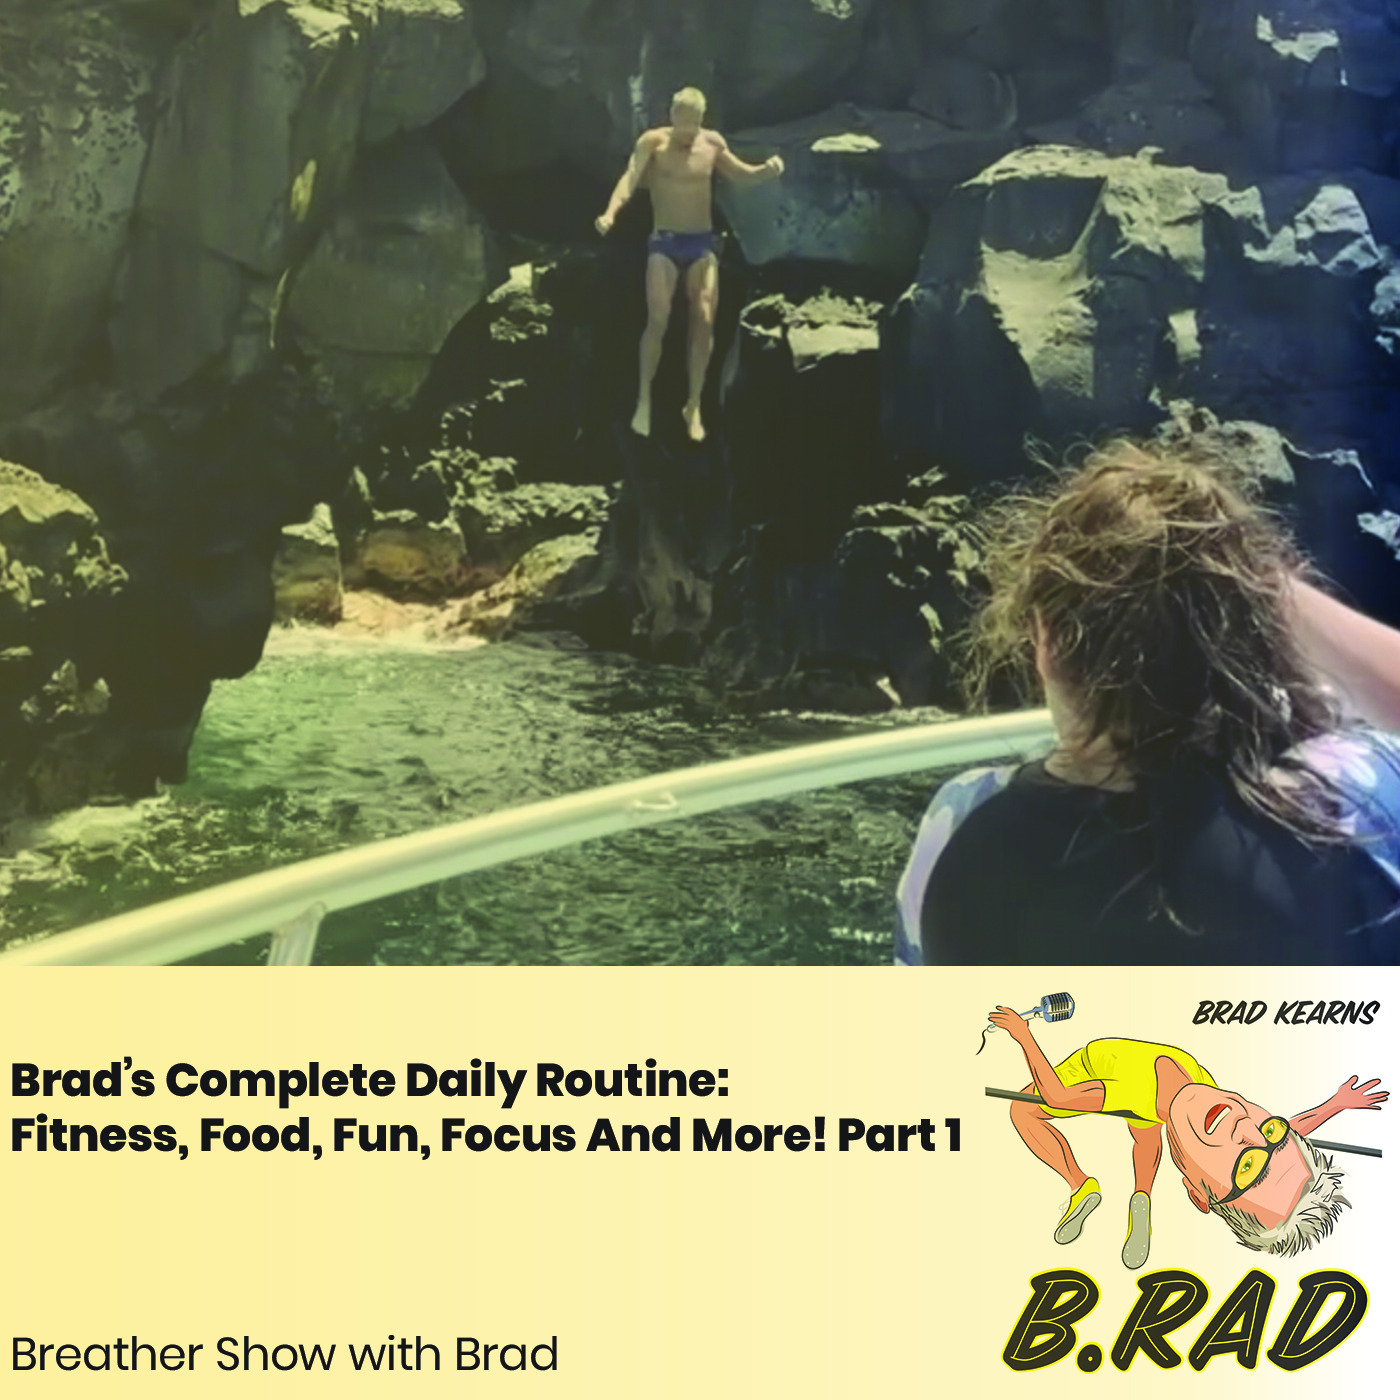 Brad’s Complete Daily Routine: Fitness, Food, Fun, Focus And More! Part 1 (Breather Episode with Brad)